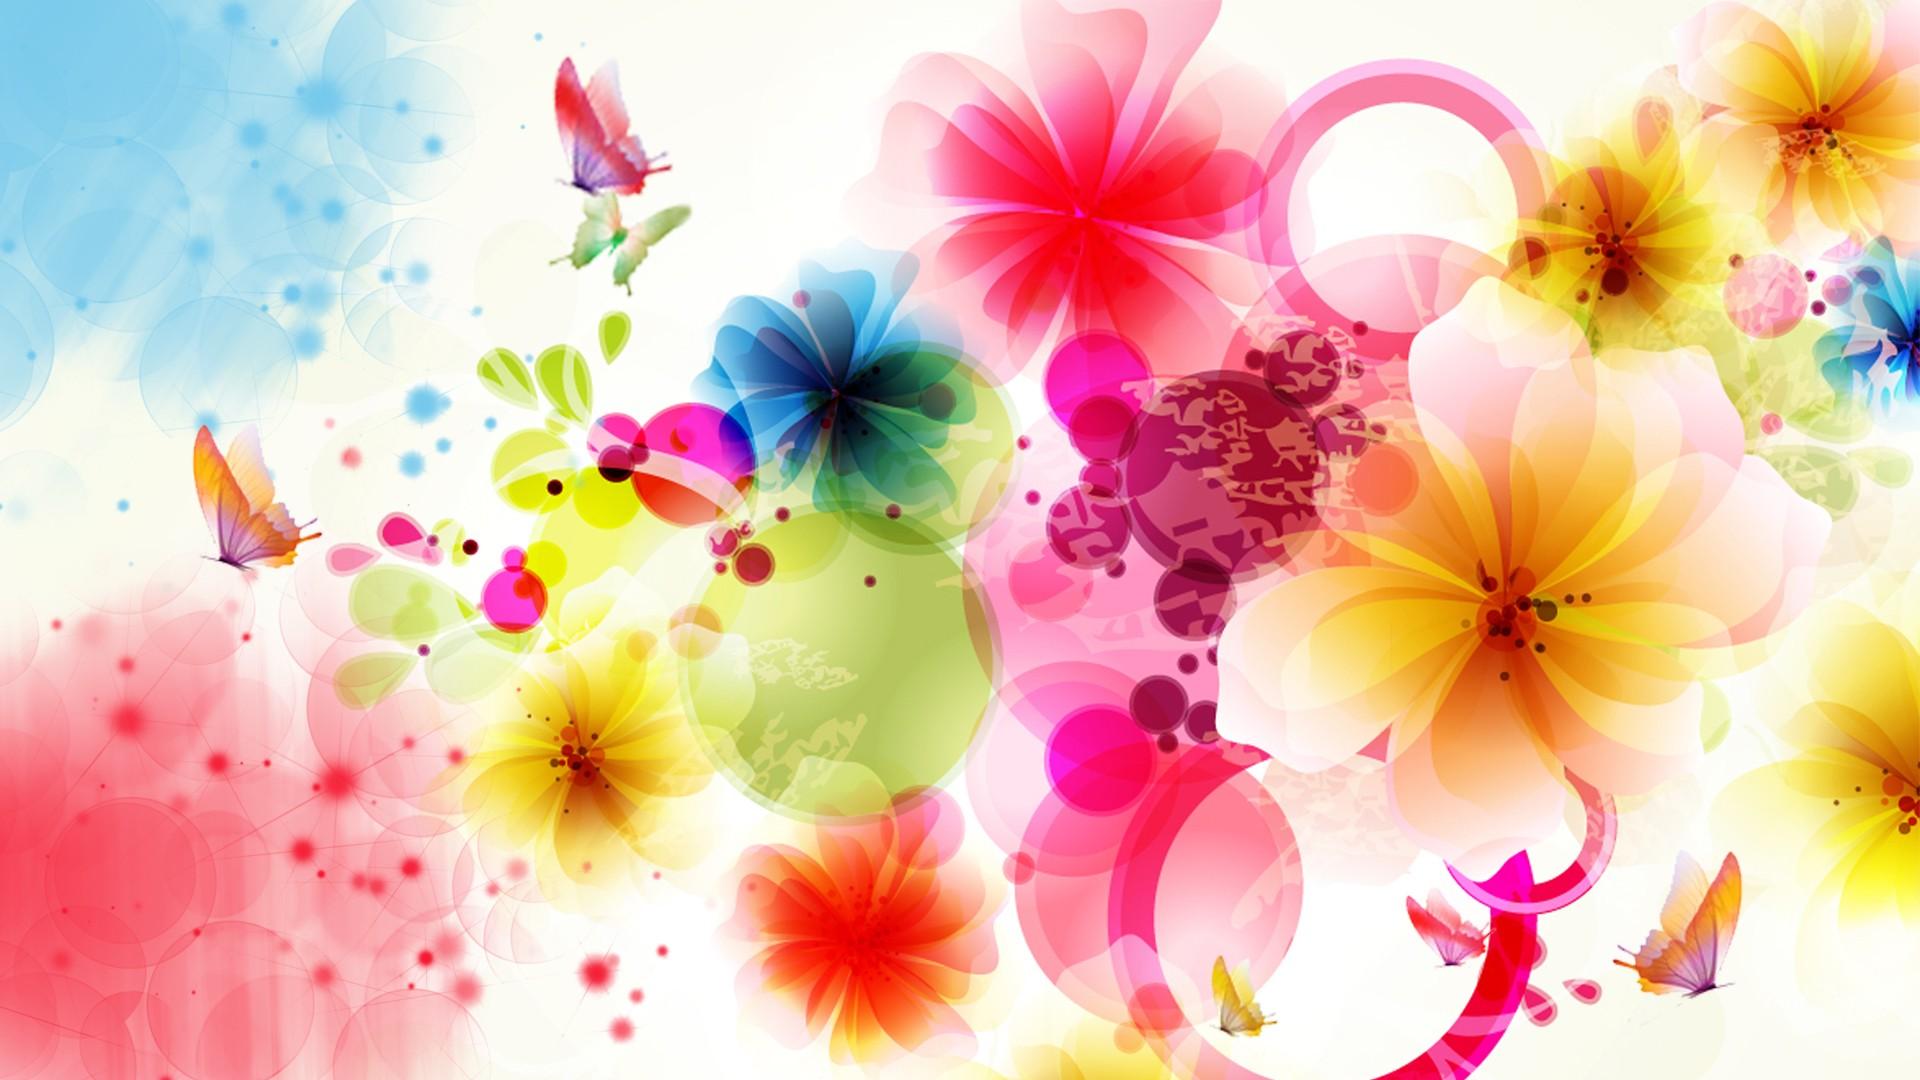 Colorful Abstract Flower wallpaper Collection